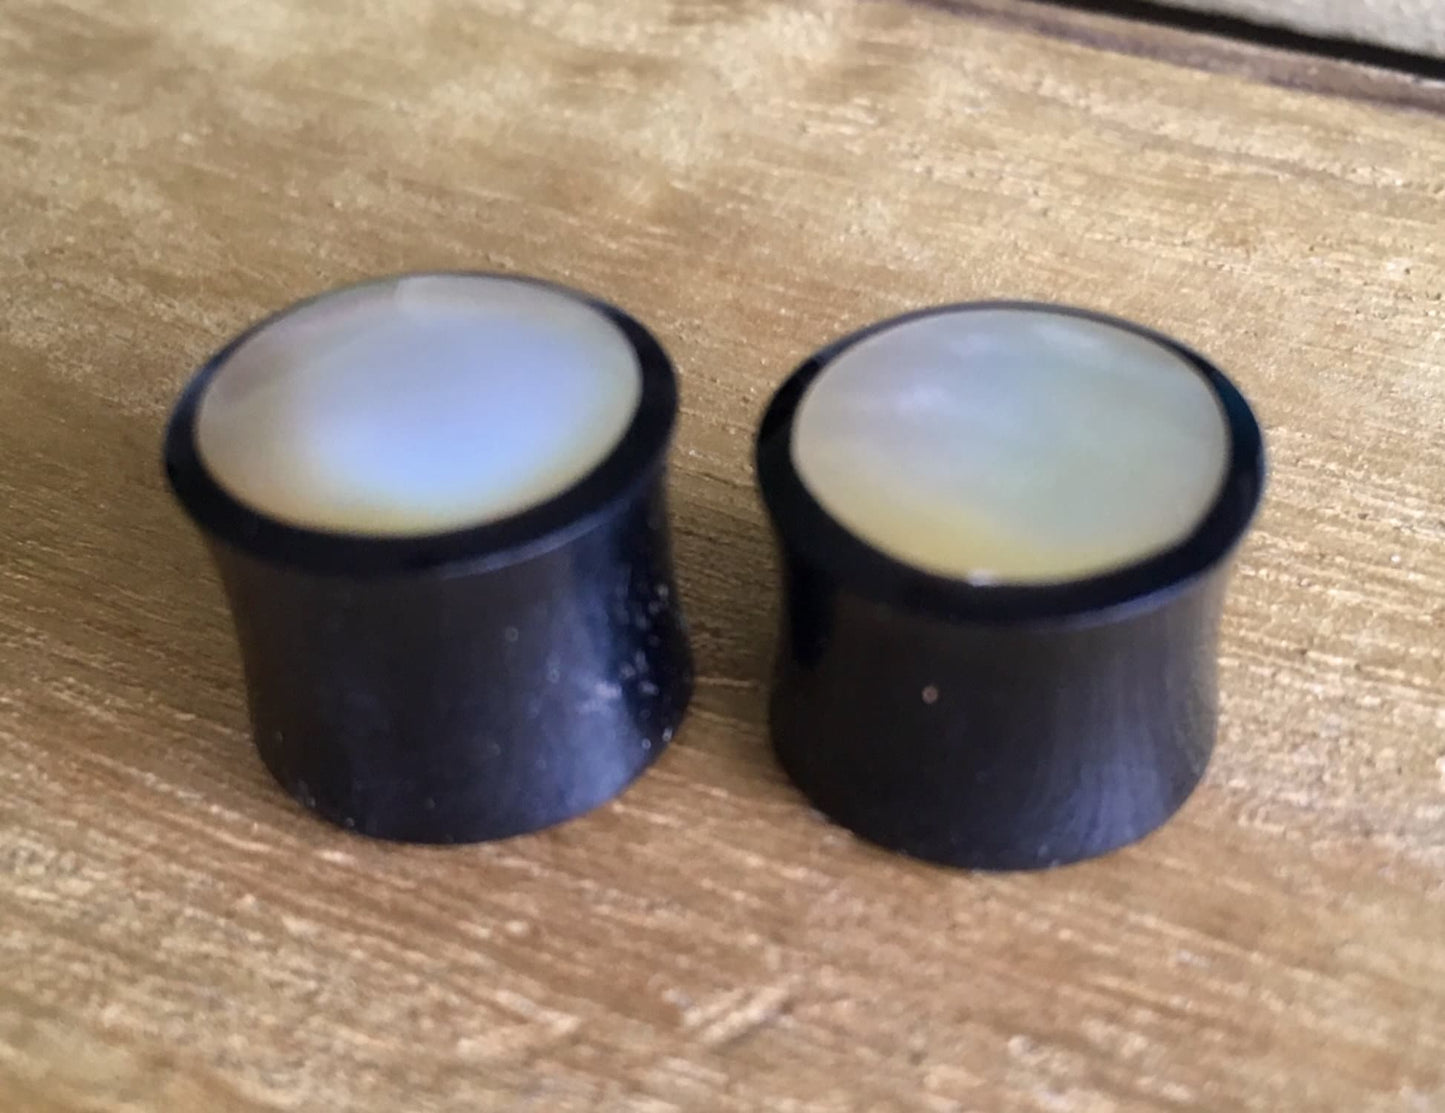 PAIR of Unique Organic Horn with Mother of Pearl Inlay Plugs - Gauges 4g (5mm) up to 5/8" (16mm) available!